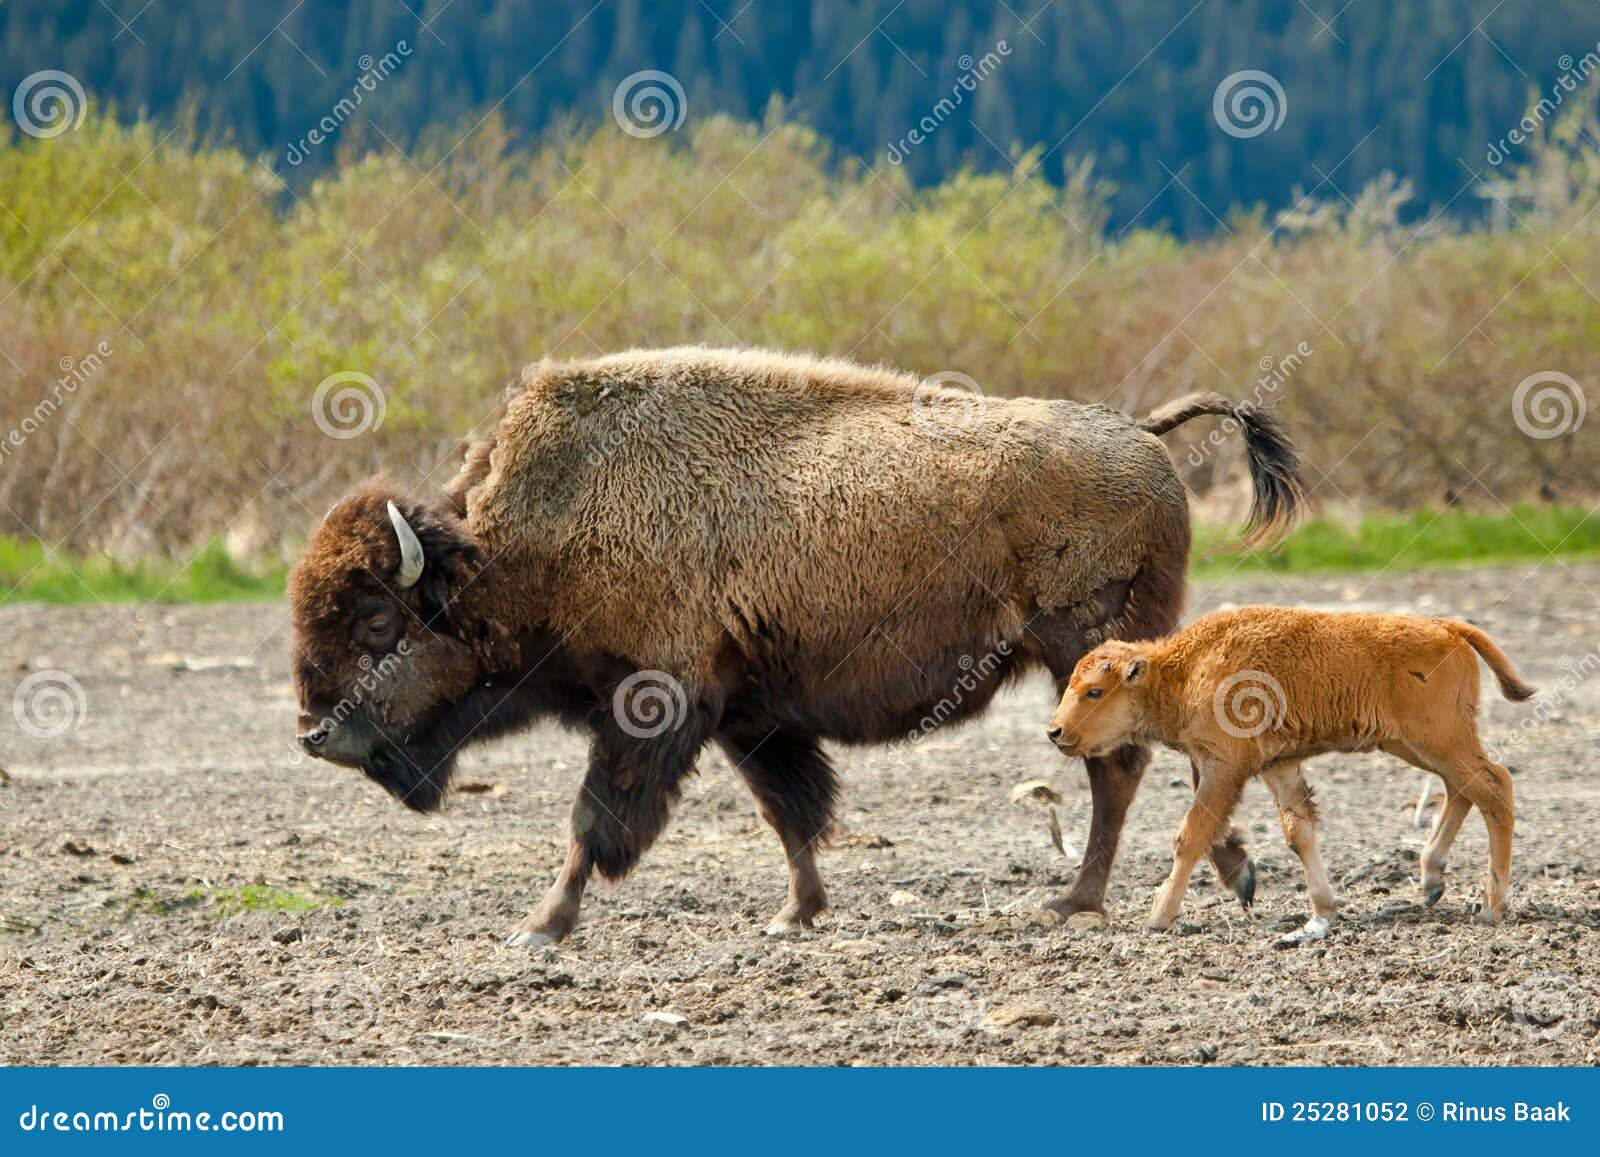 female wood bison with calf